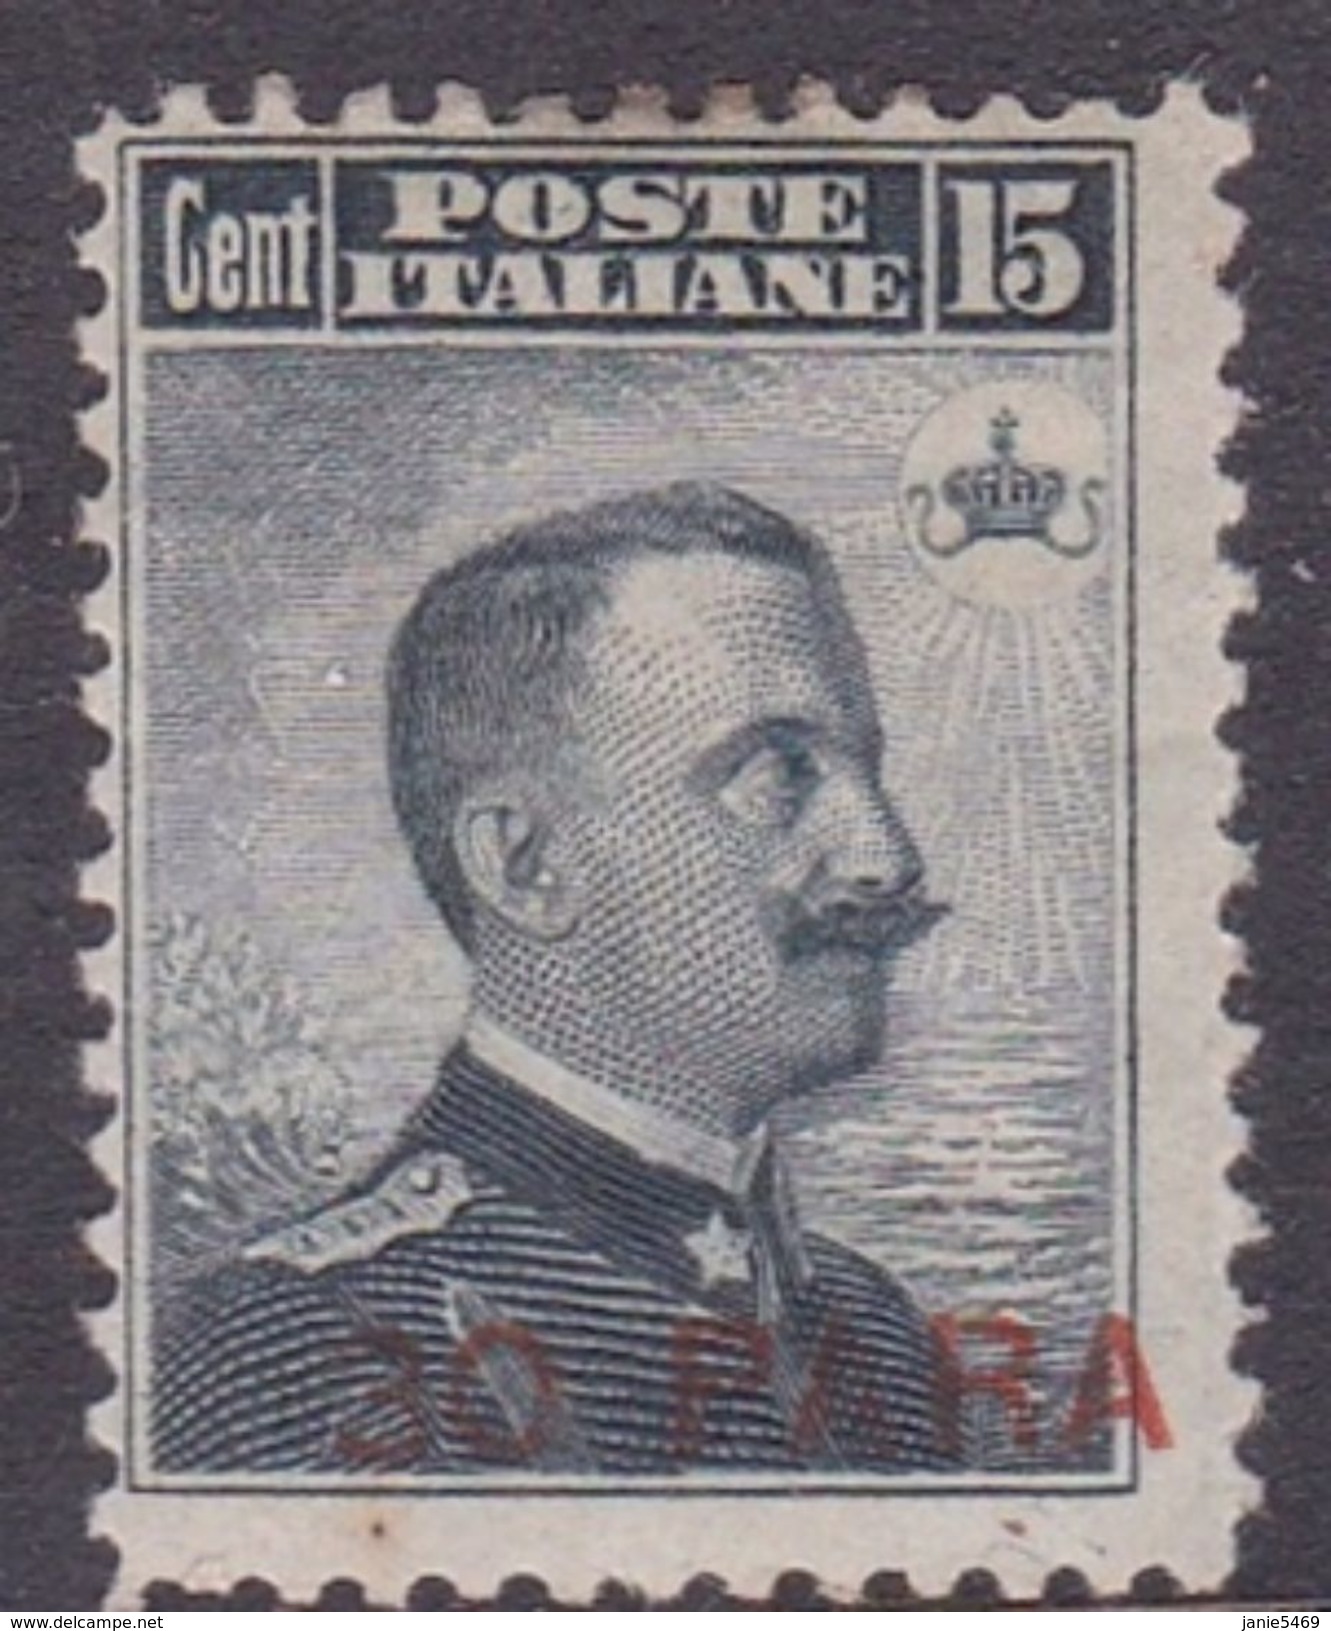 Italian Post Offices In The Levant, Costantinople S 15 1908 30 Para On 15c Grey, Mint Hinged - Emissions Générales